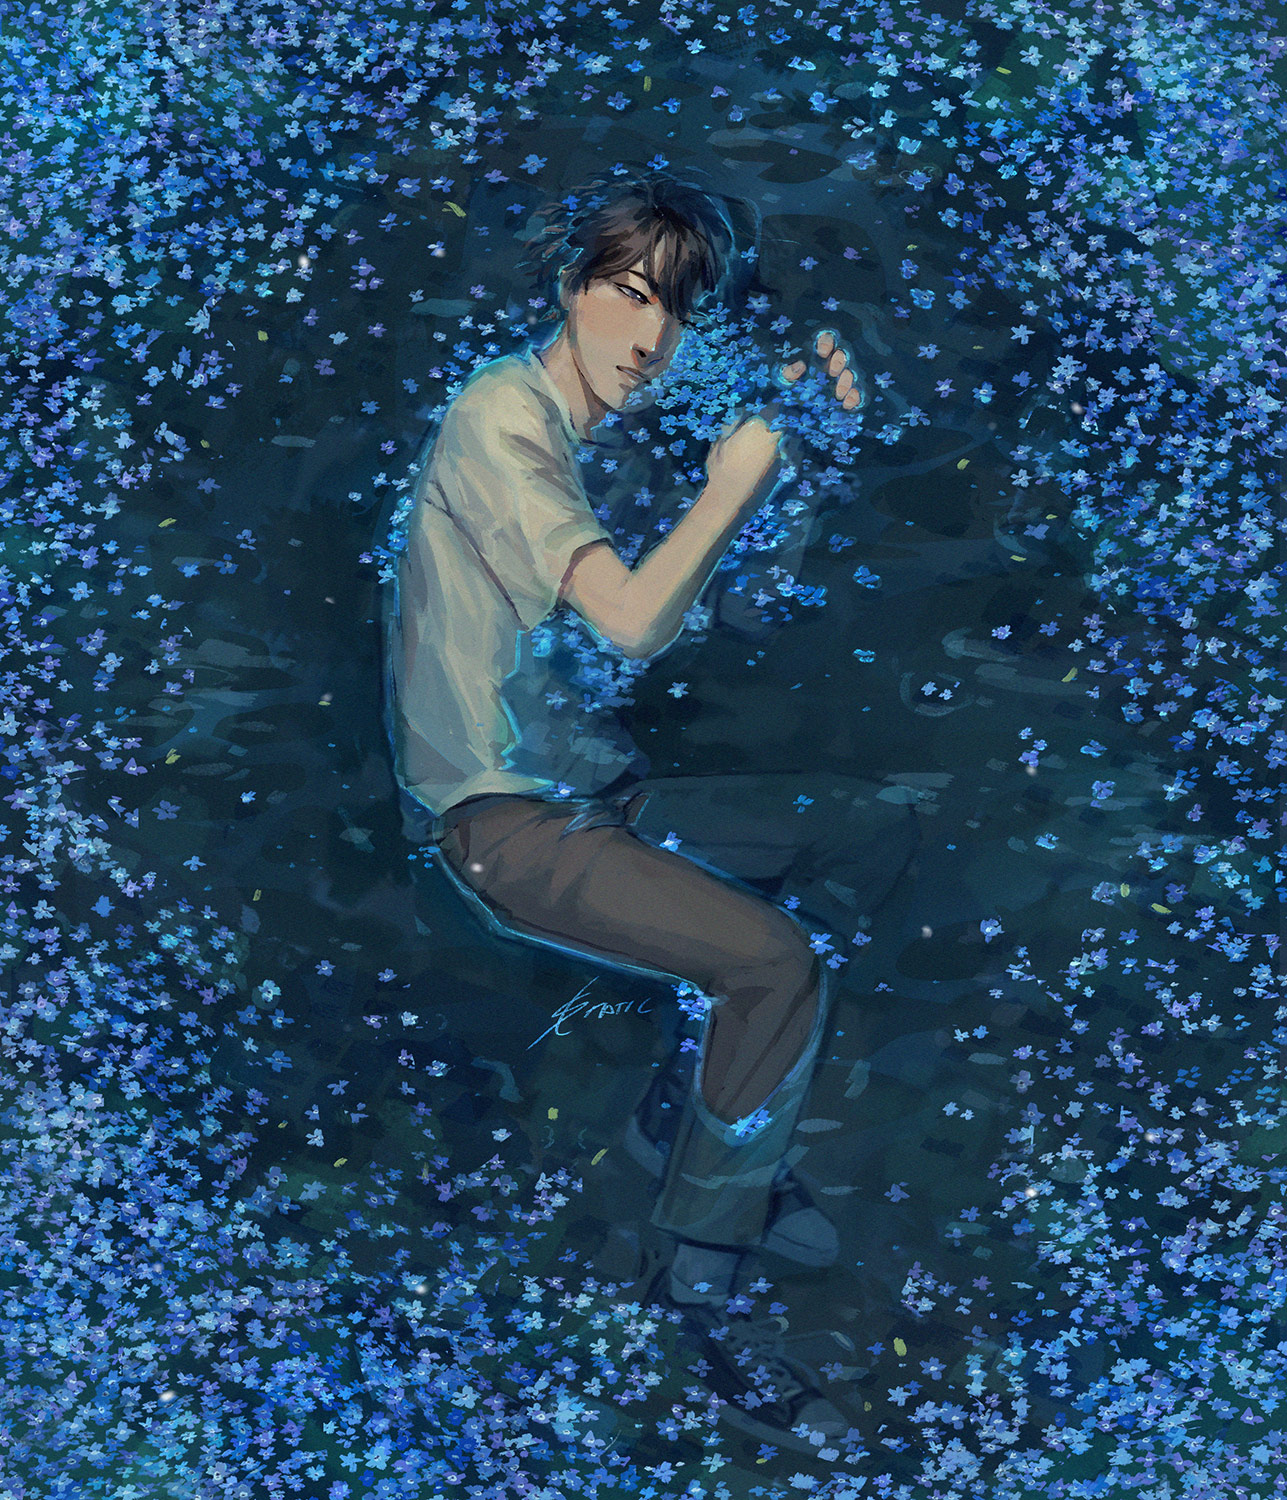 A boy half submerged in water surrounded by forget-me-nots.